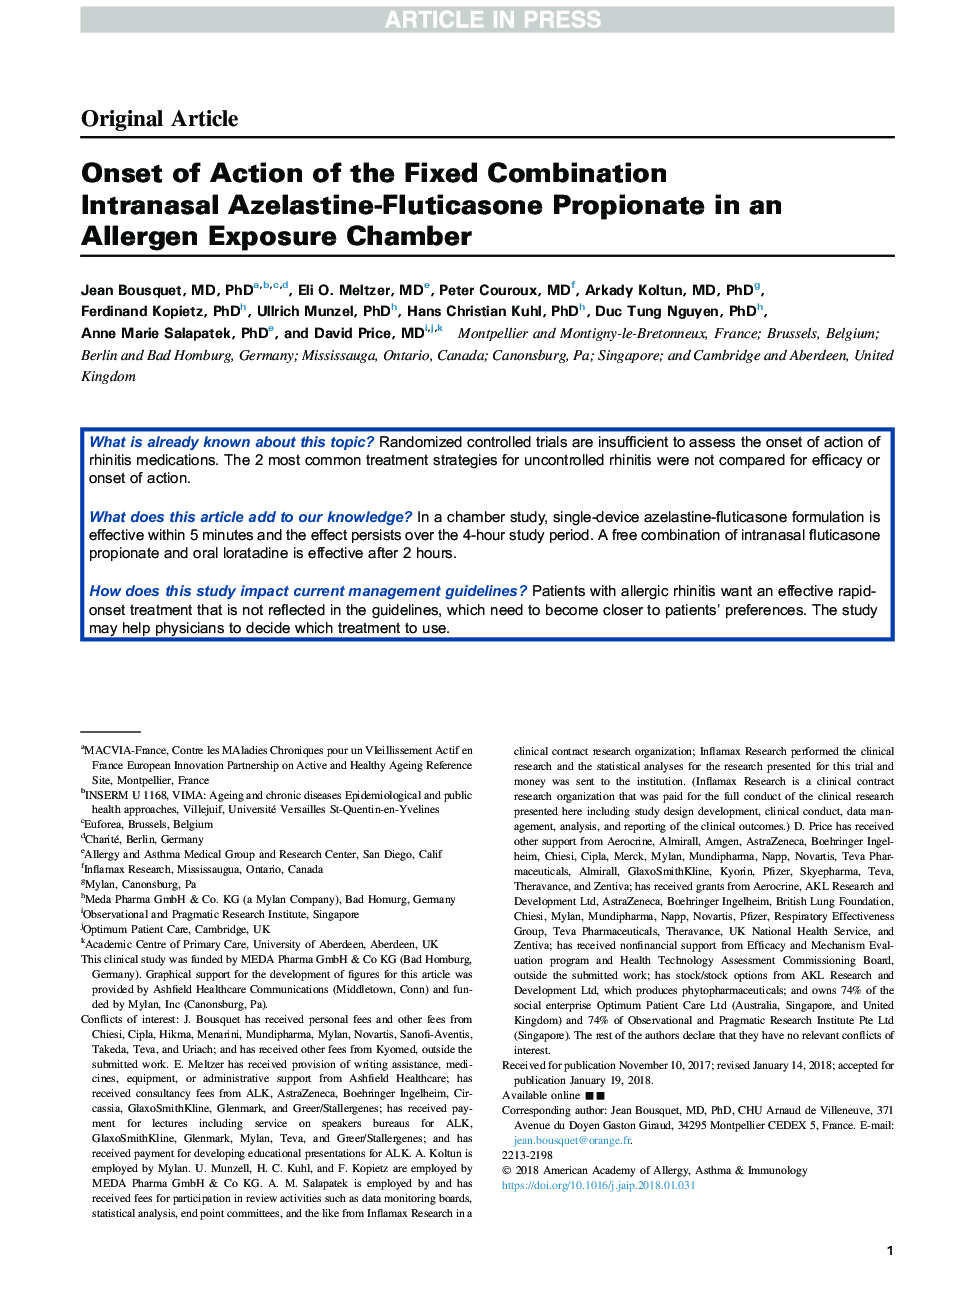 Onset of Action of the Fixed Combination Intranasal Azelastine-Fluticasone Propionate in an Allergen Exposure Chamber